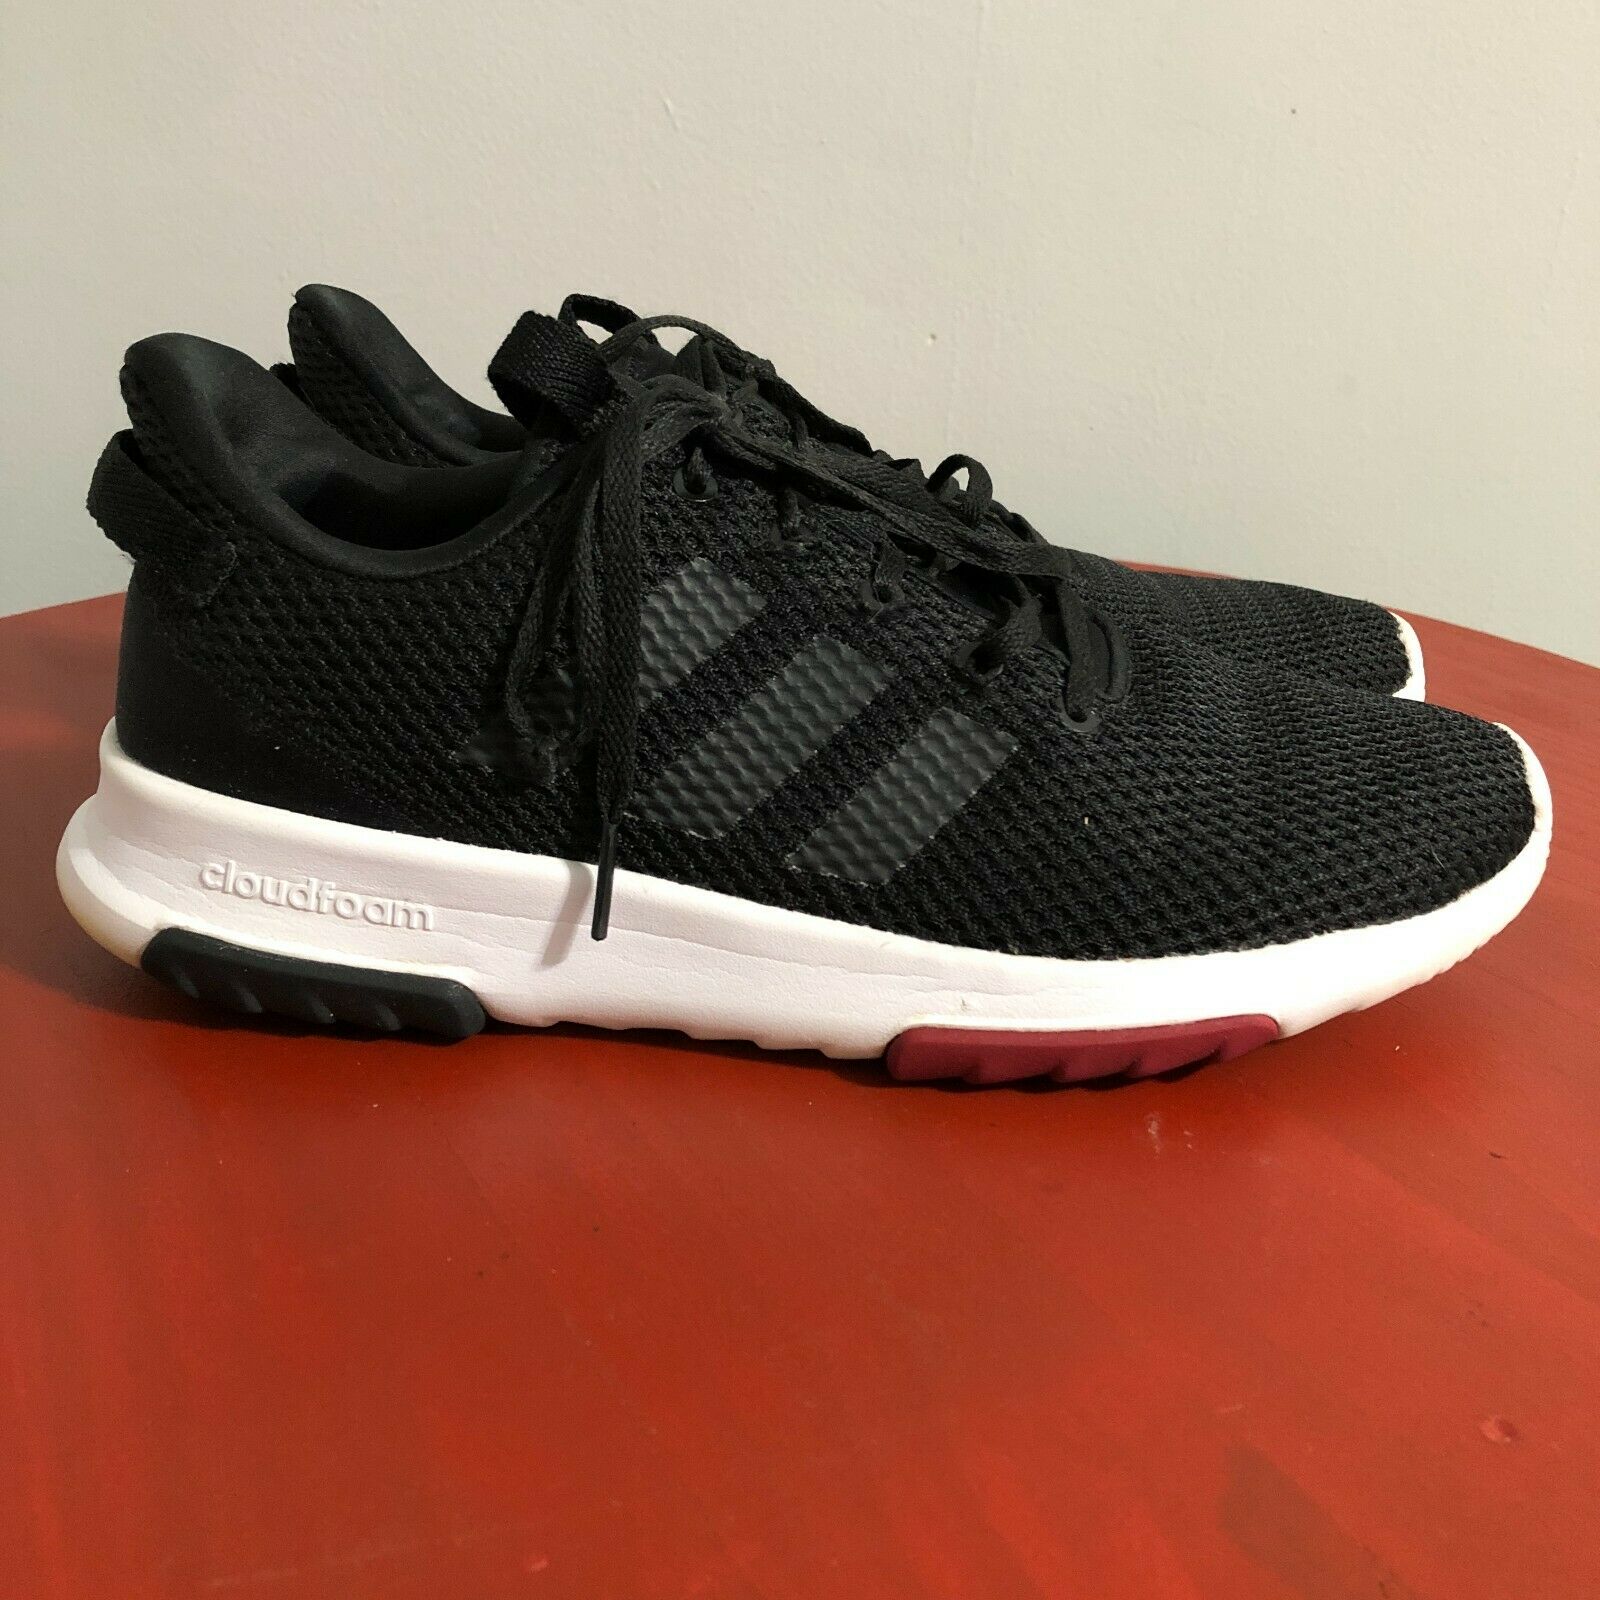 Adidas Cloudfoam Racer Women's Size 9.5 Running Shoes Black Athletic Sneakers